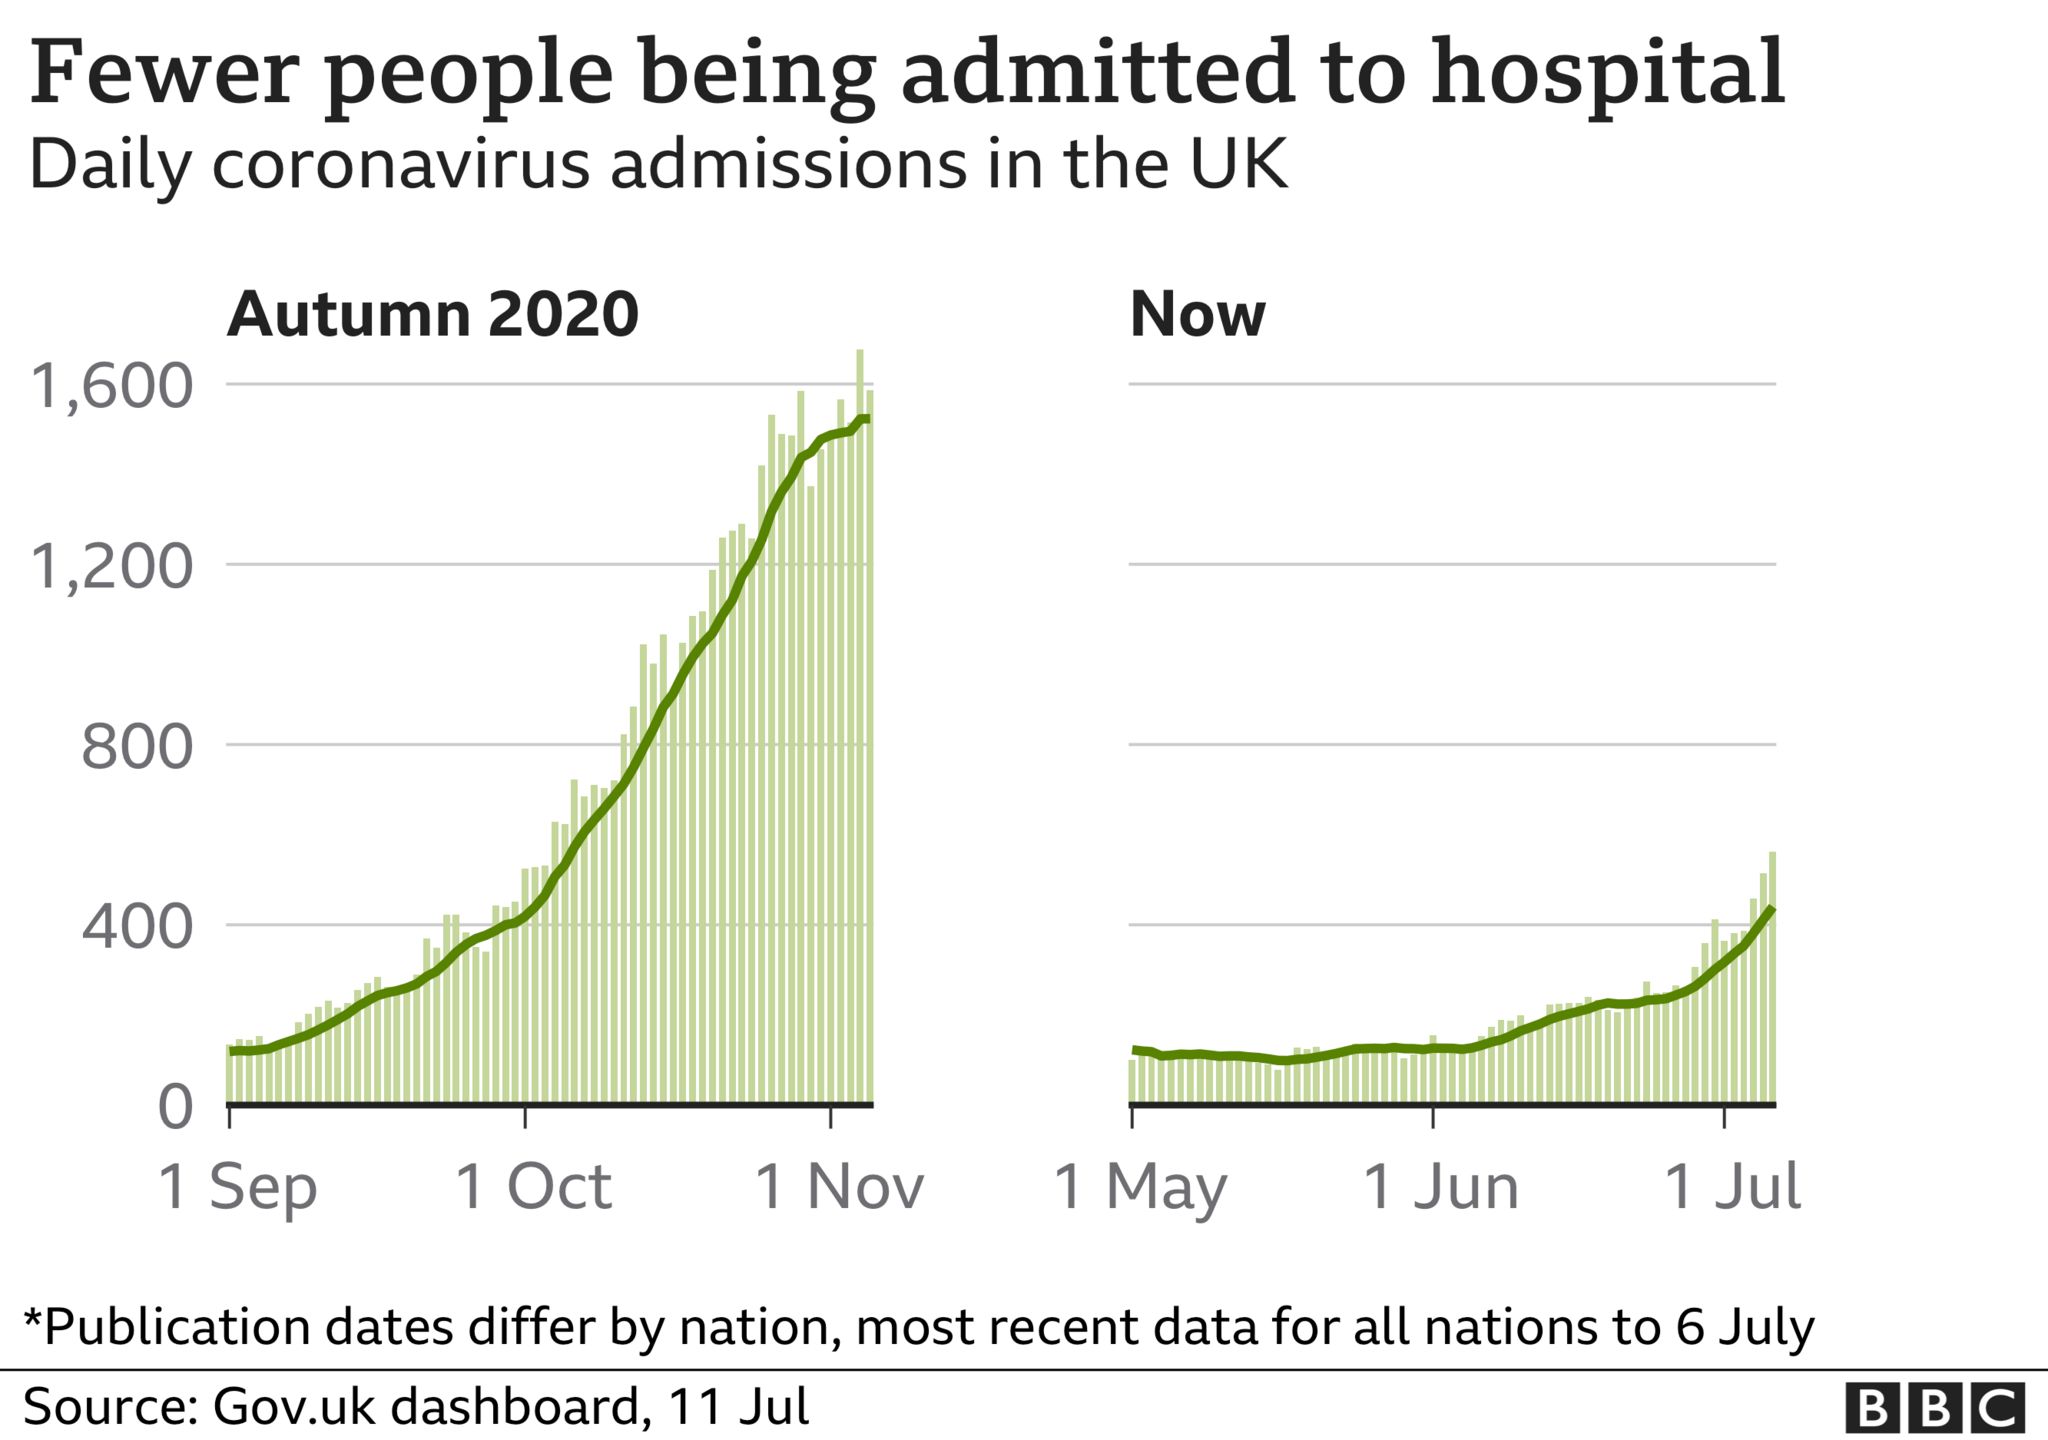 Graph showing fewer people being admitted to hospital with Covid-19 in the UK compared to autumn 2020